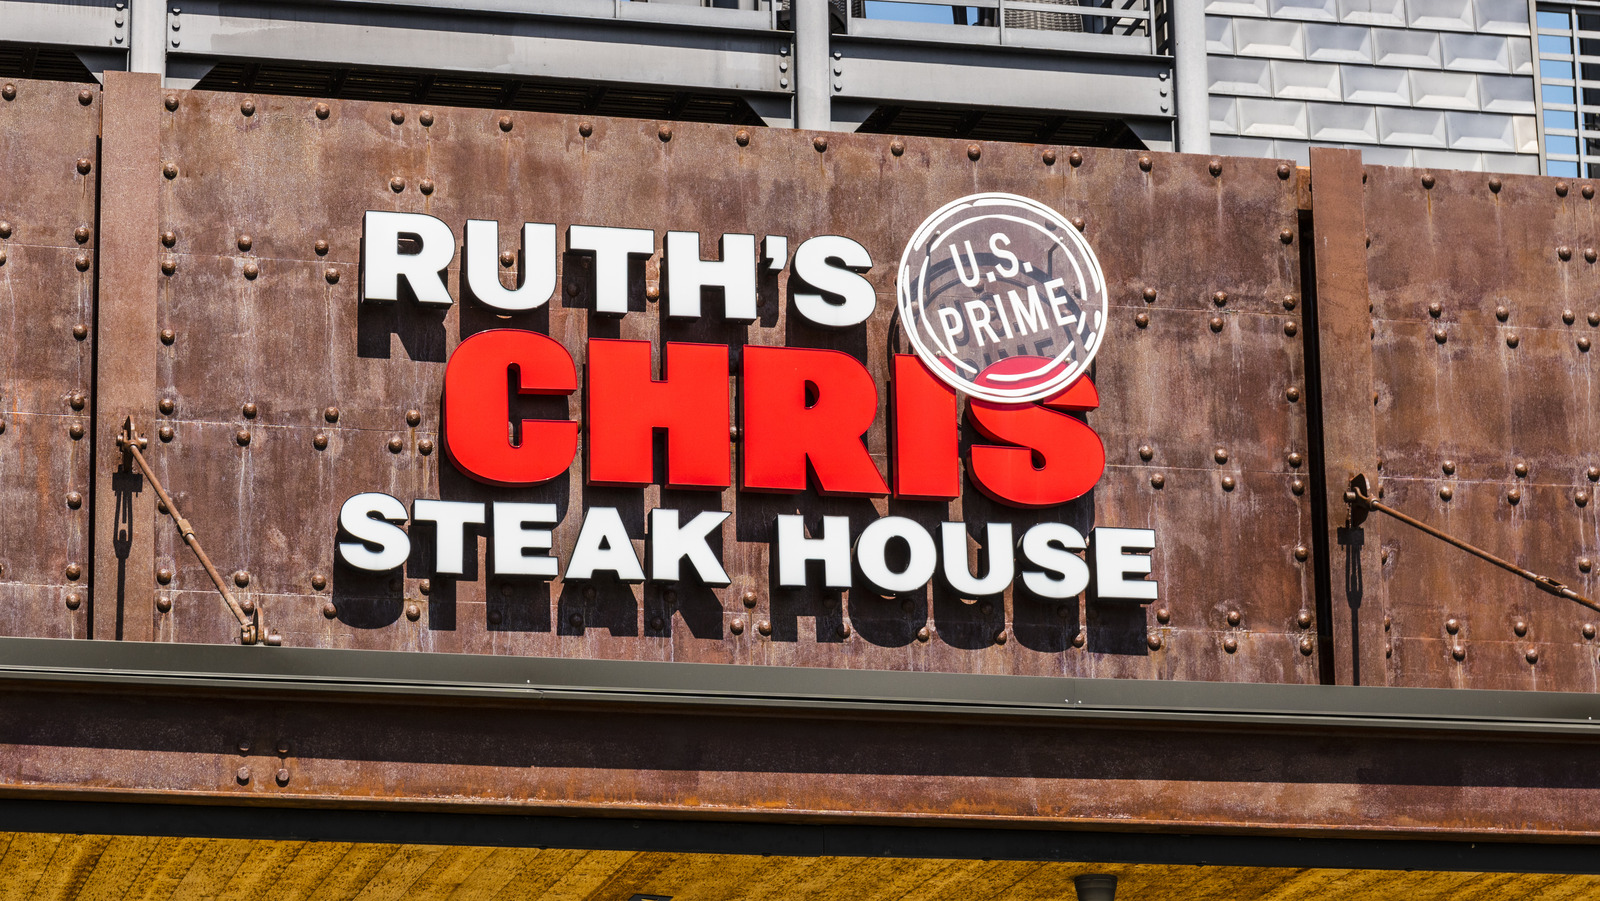 What Really Makes Ruth's Chris Steak House Steaks So Delicious